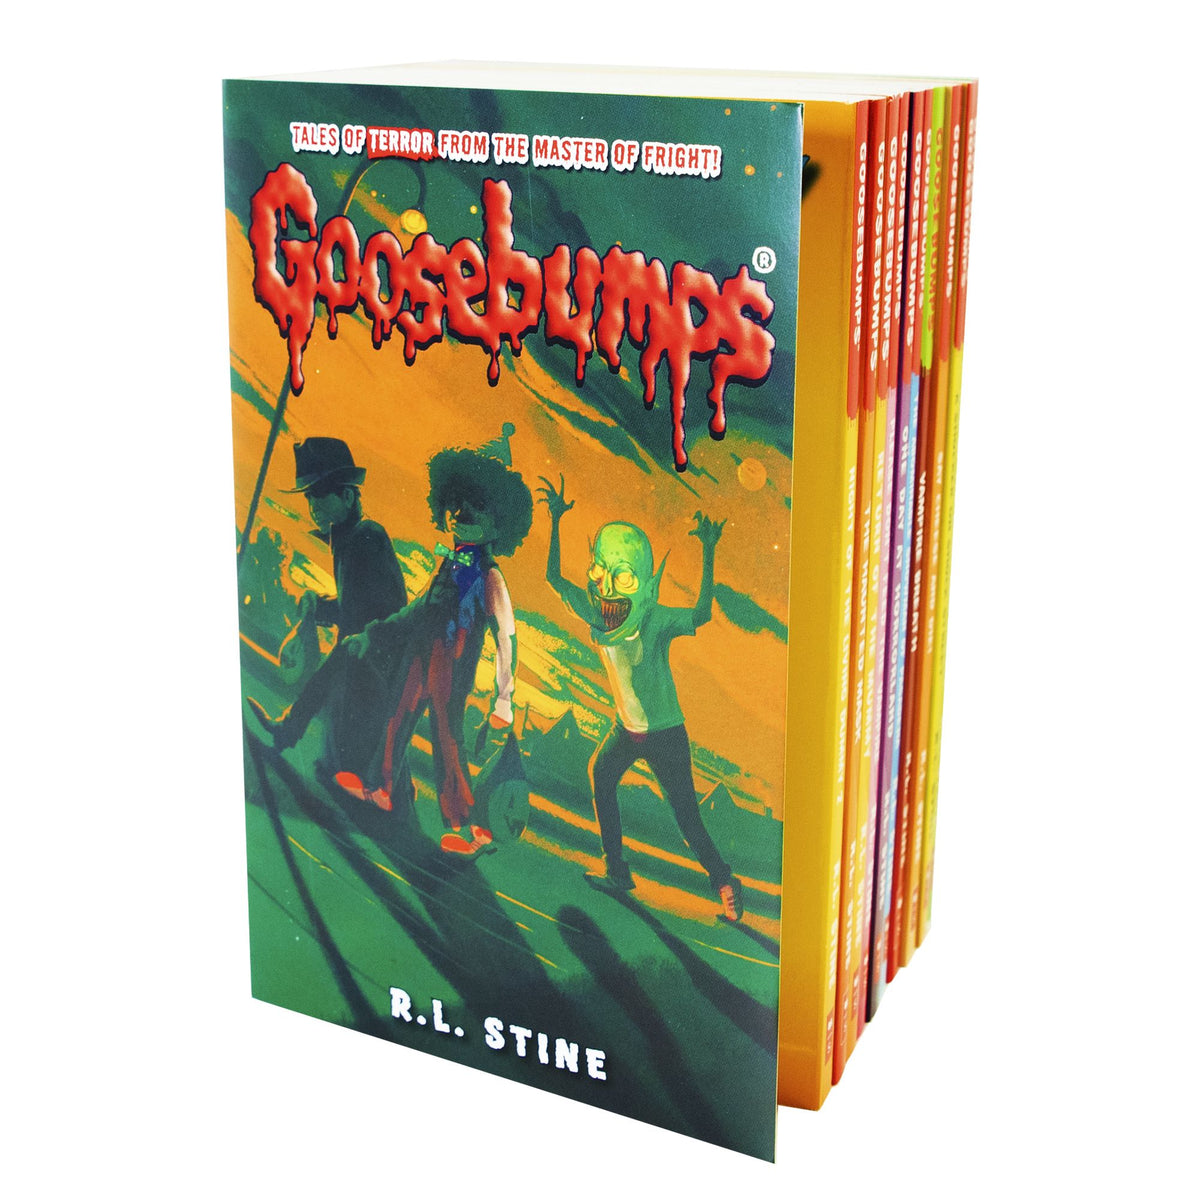 Goosebumps: The Classic Series (Set 2) by R. L. Stine 10 Books Collection -  Ages 9-14 - Paperback